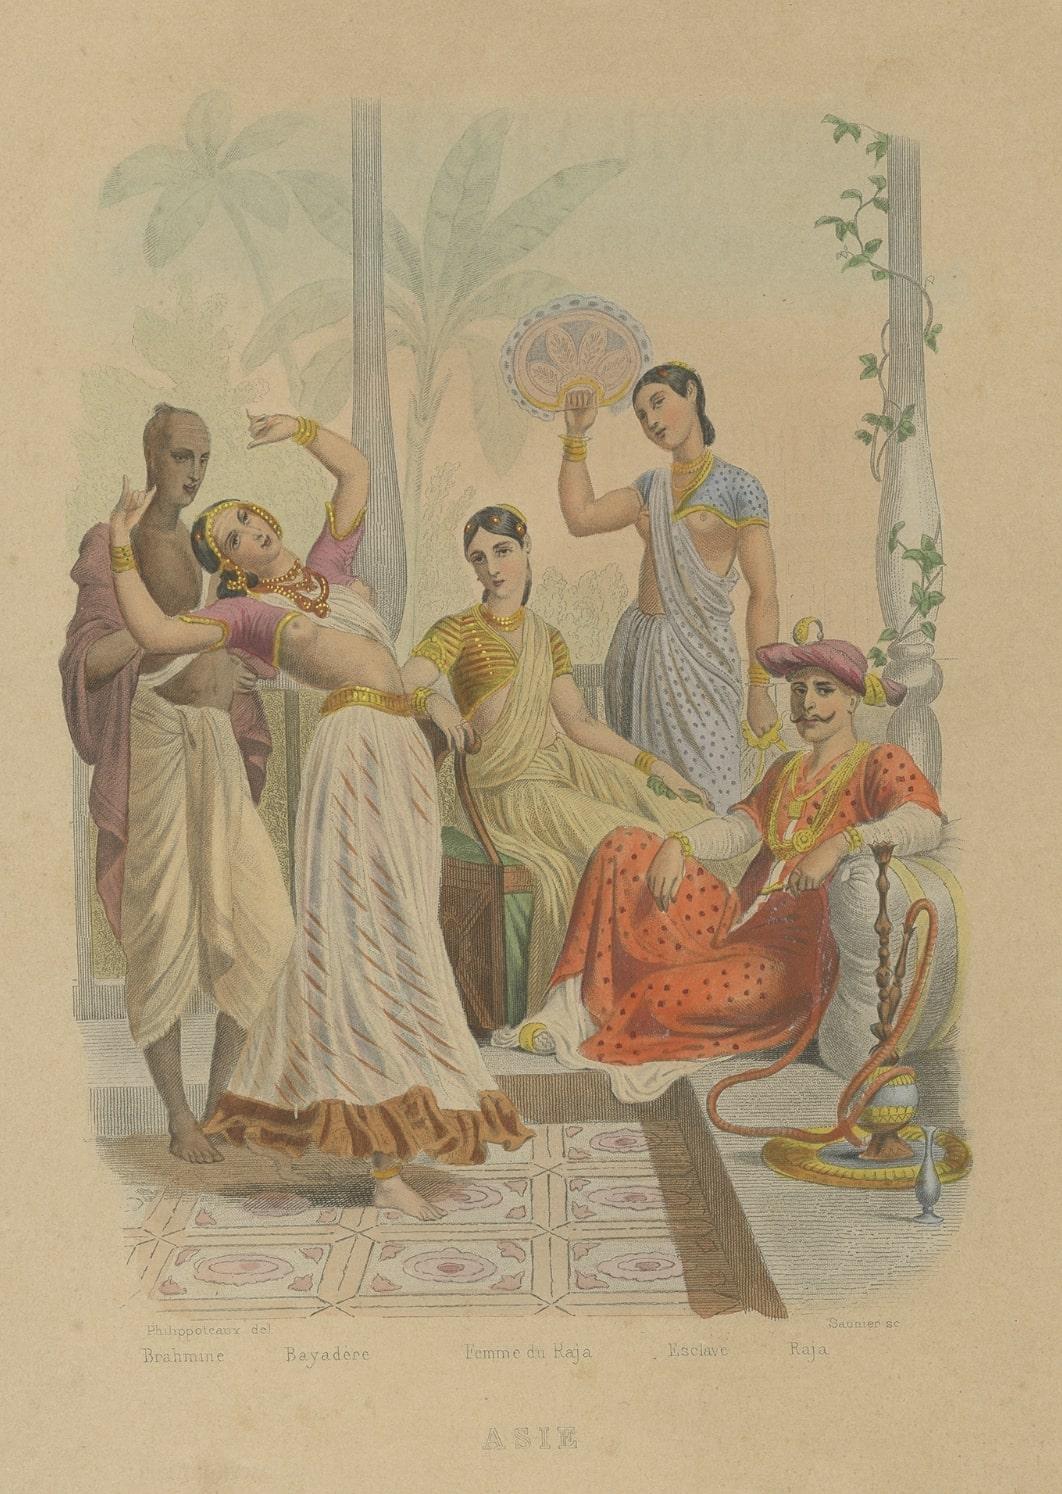 Paper Antique Print of a Brahmin, Rajah, Slave and Other Figures of Asia, c.1870 For Sale